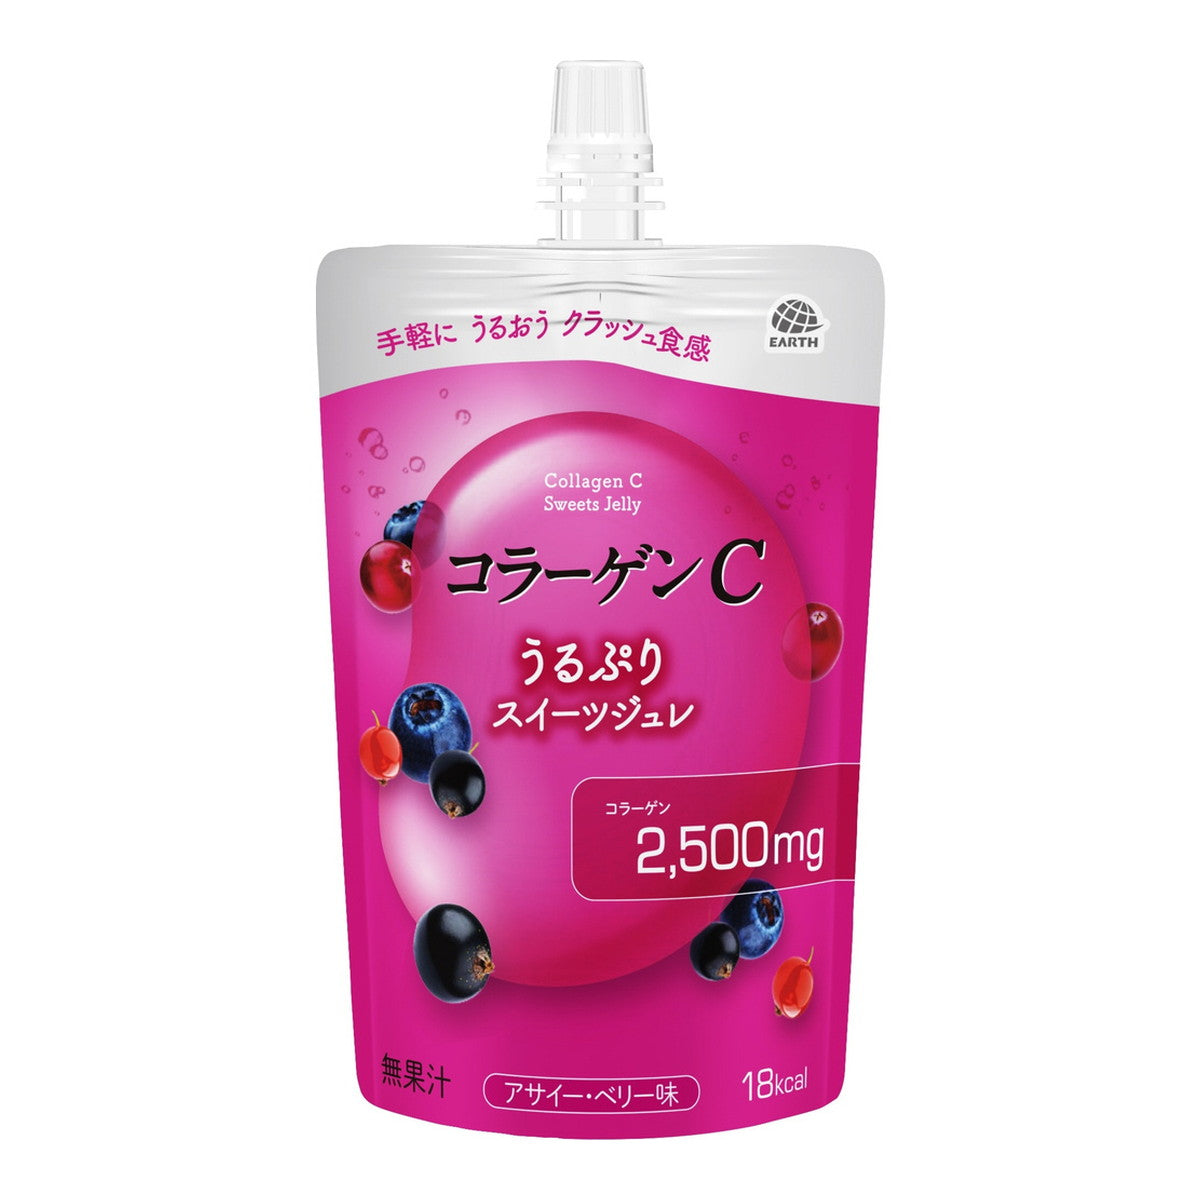 Earth Collagen C Sweets Jelly Acai Berry Flavor Health & Beauty Earth Corporation   